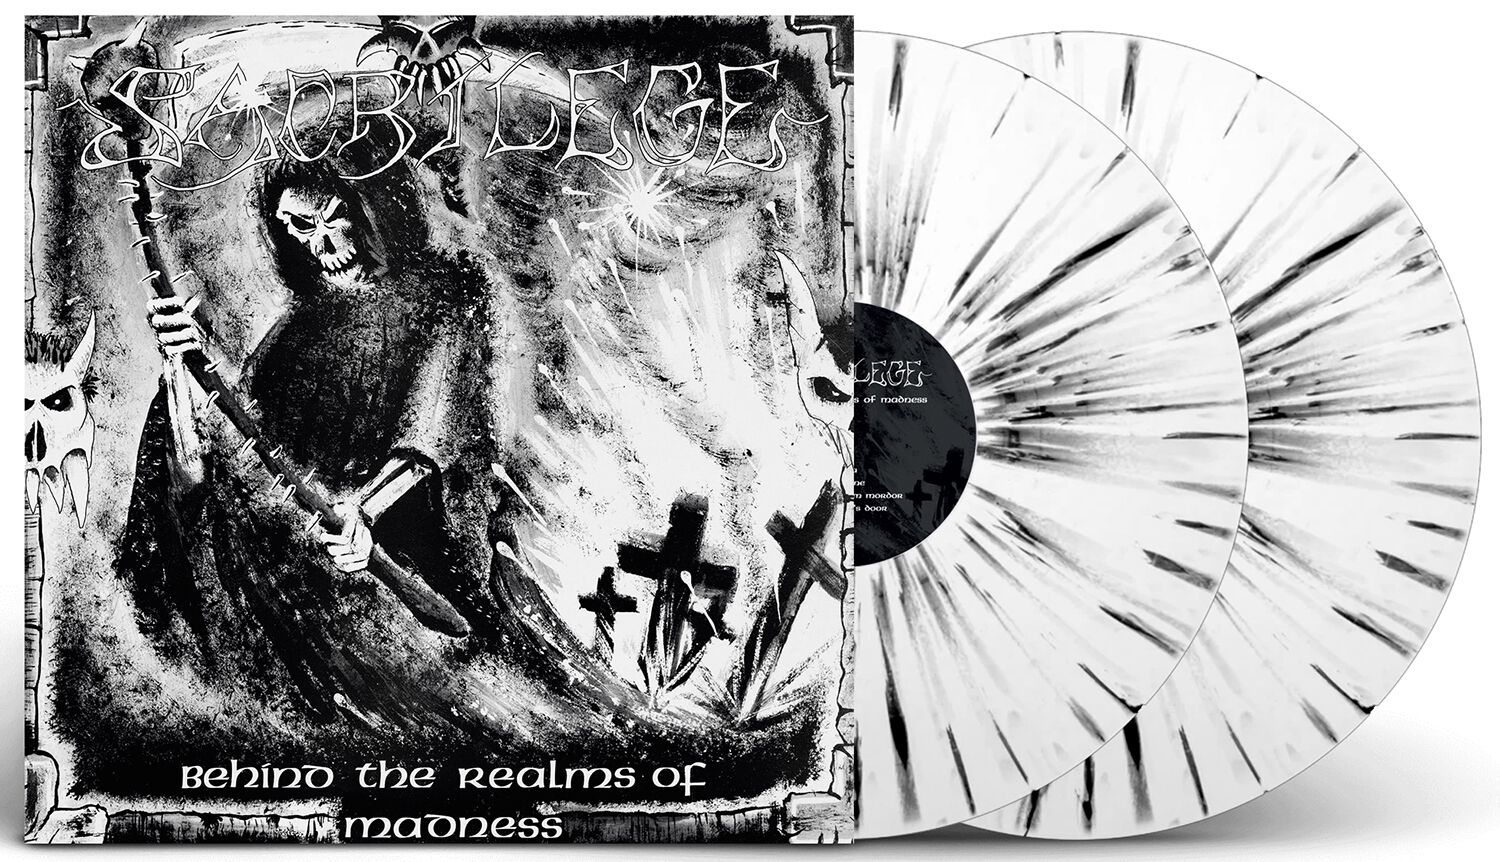 Image of Sacrilege Behind the realms of madness 2-LP splattered